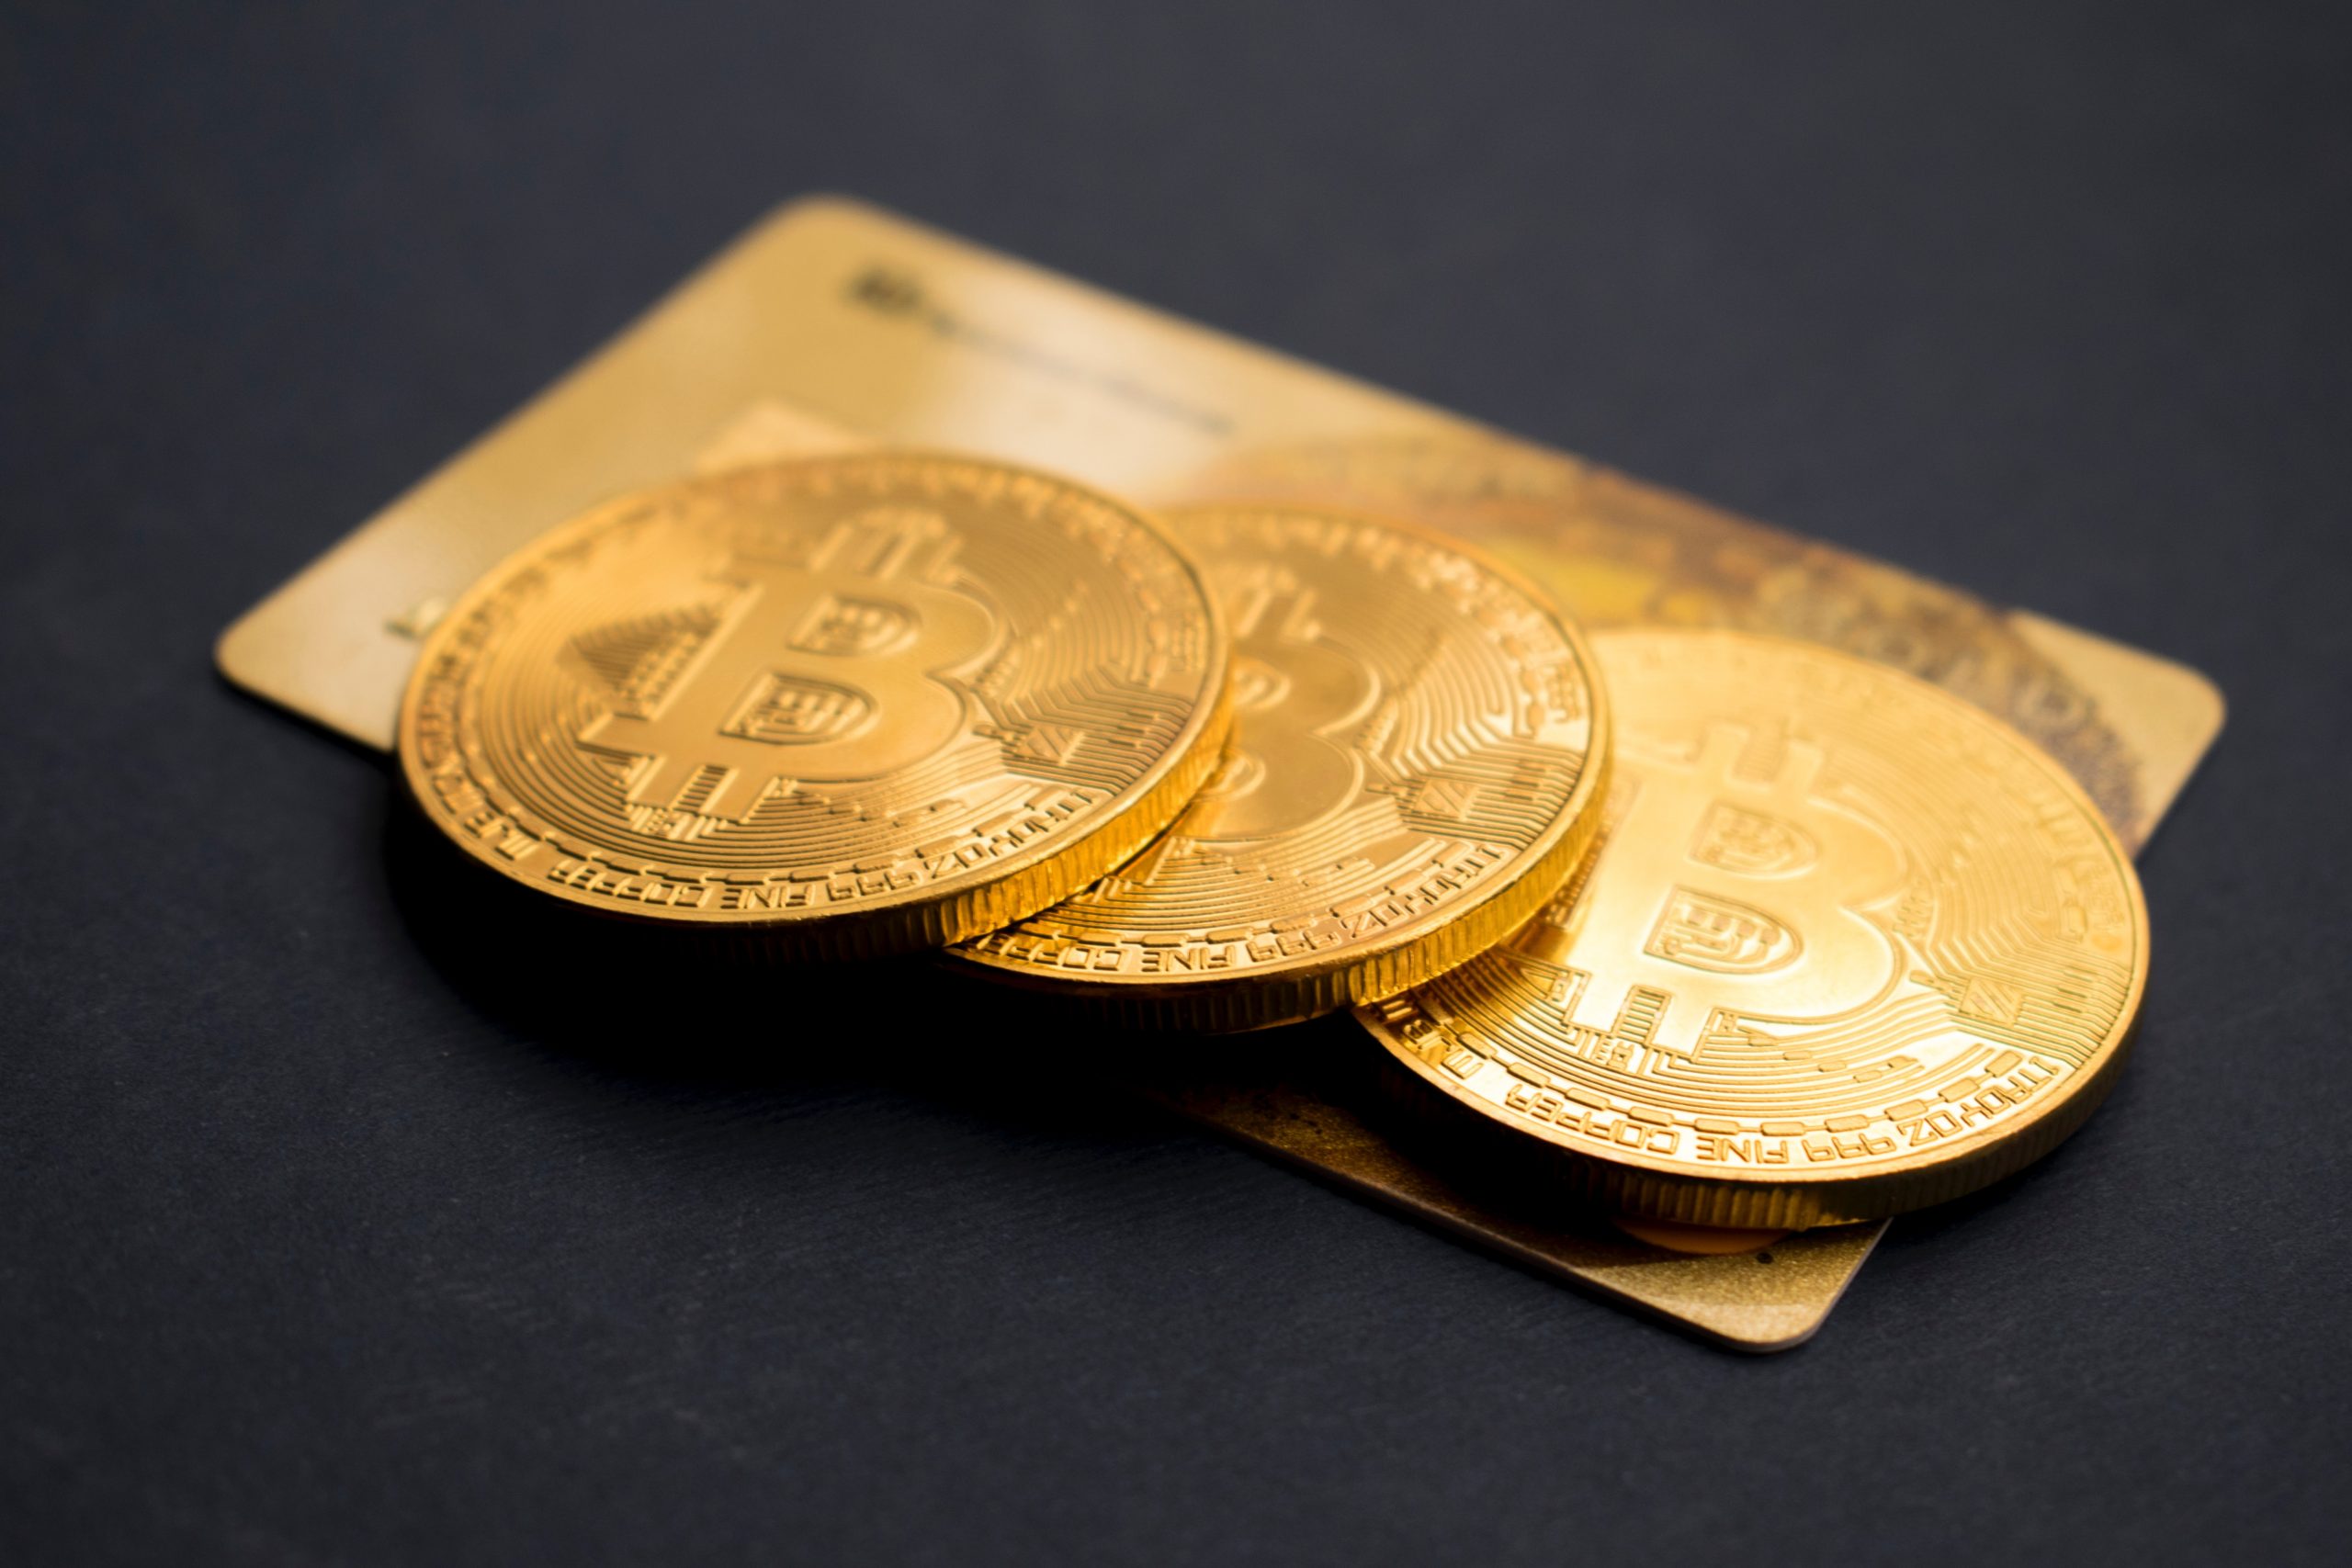 bitcoin investment three round gold-colored Bitcoin tokens